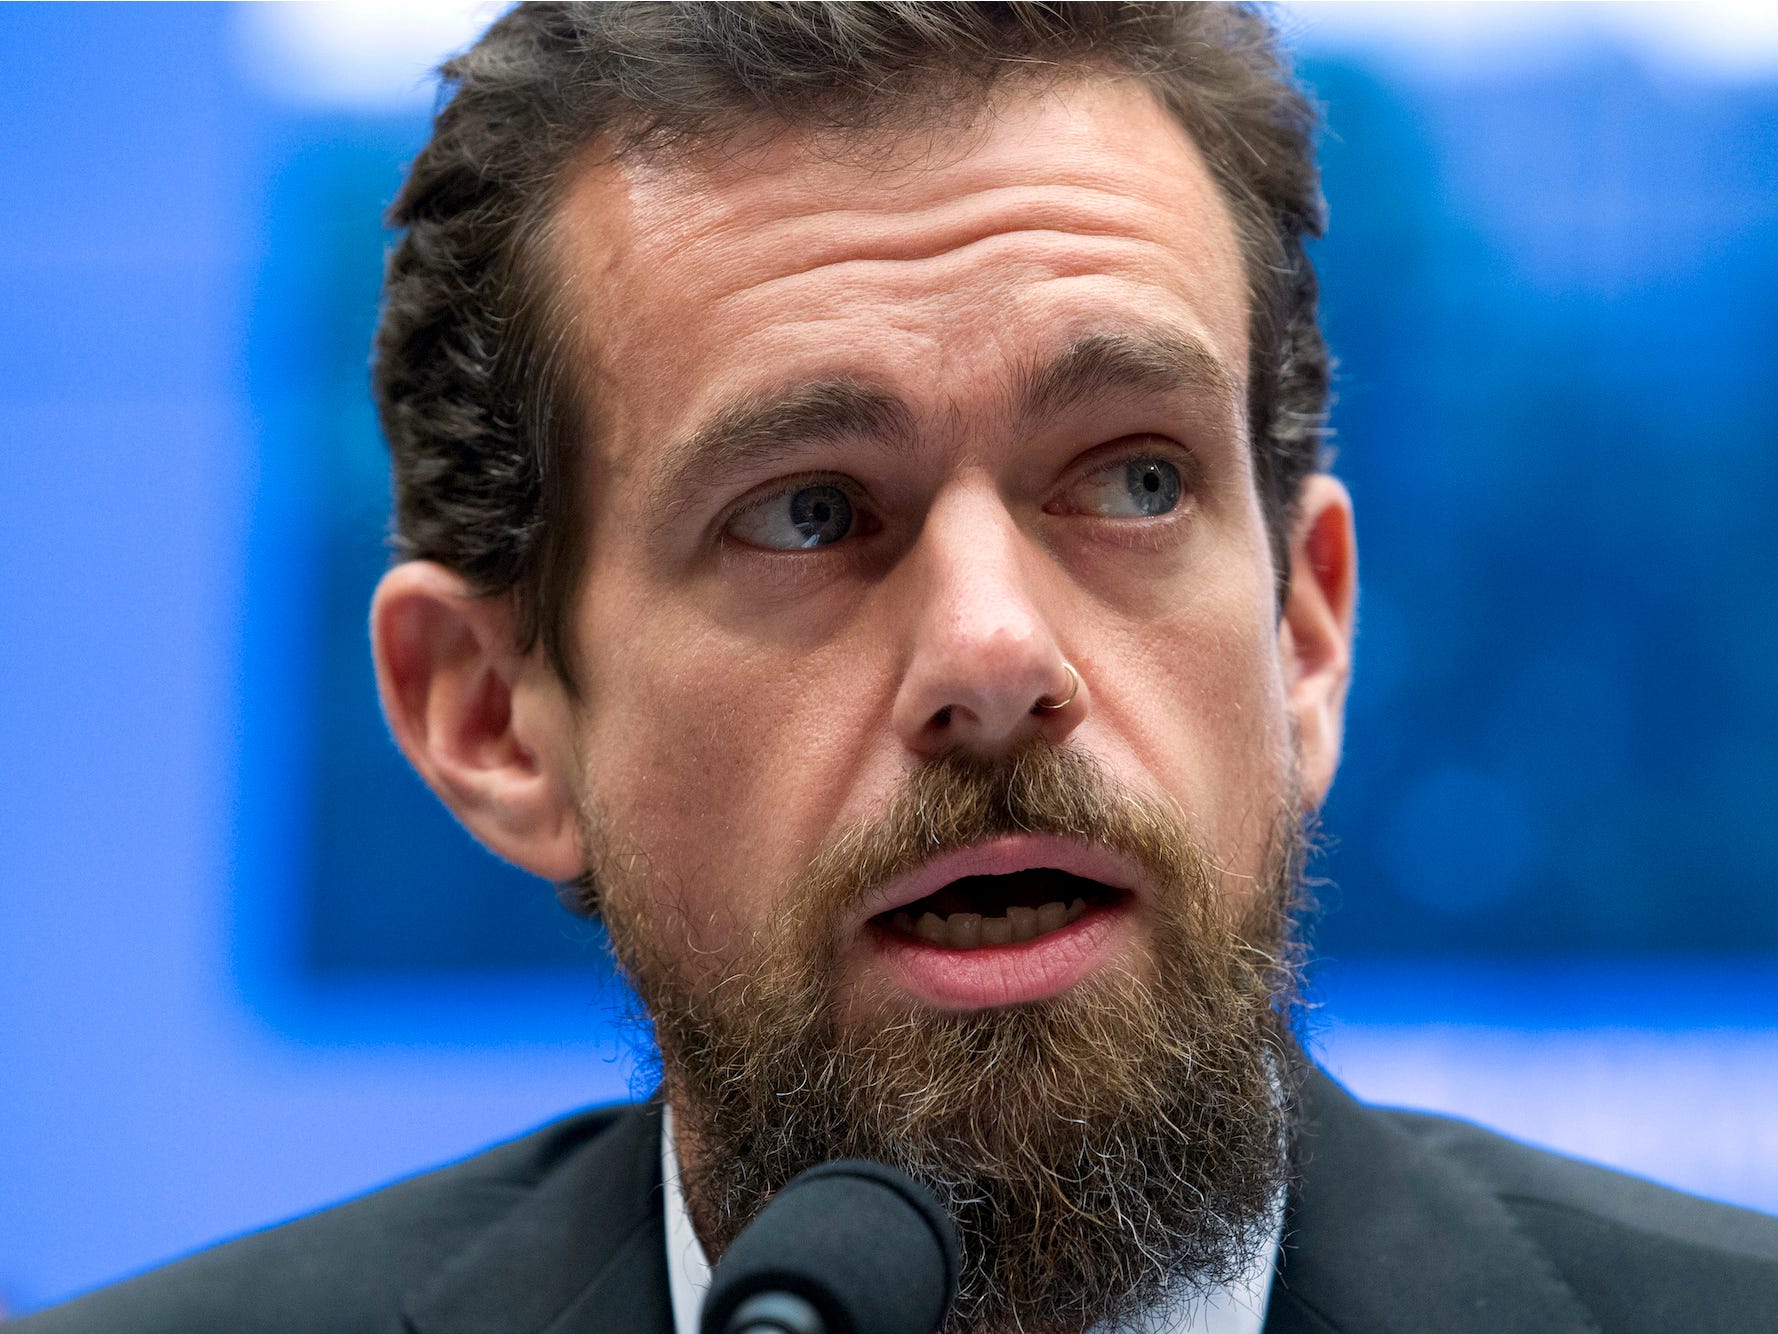 Jack Dorsey speaking into a microphone.